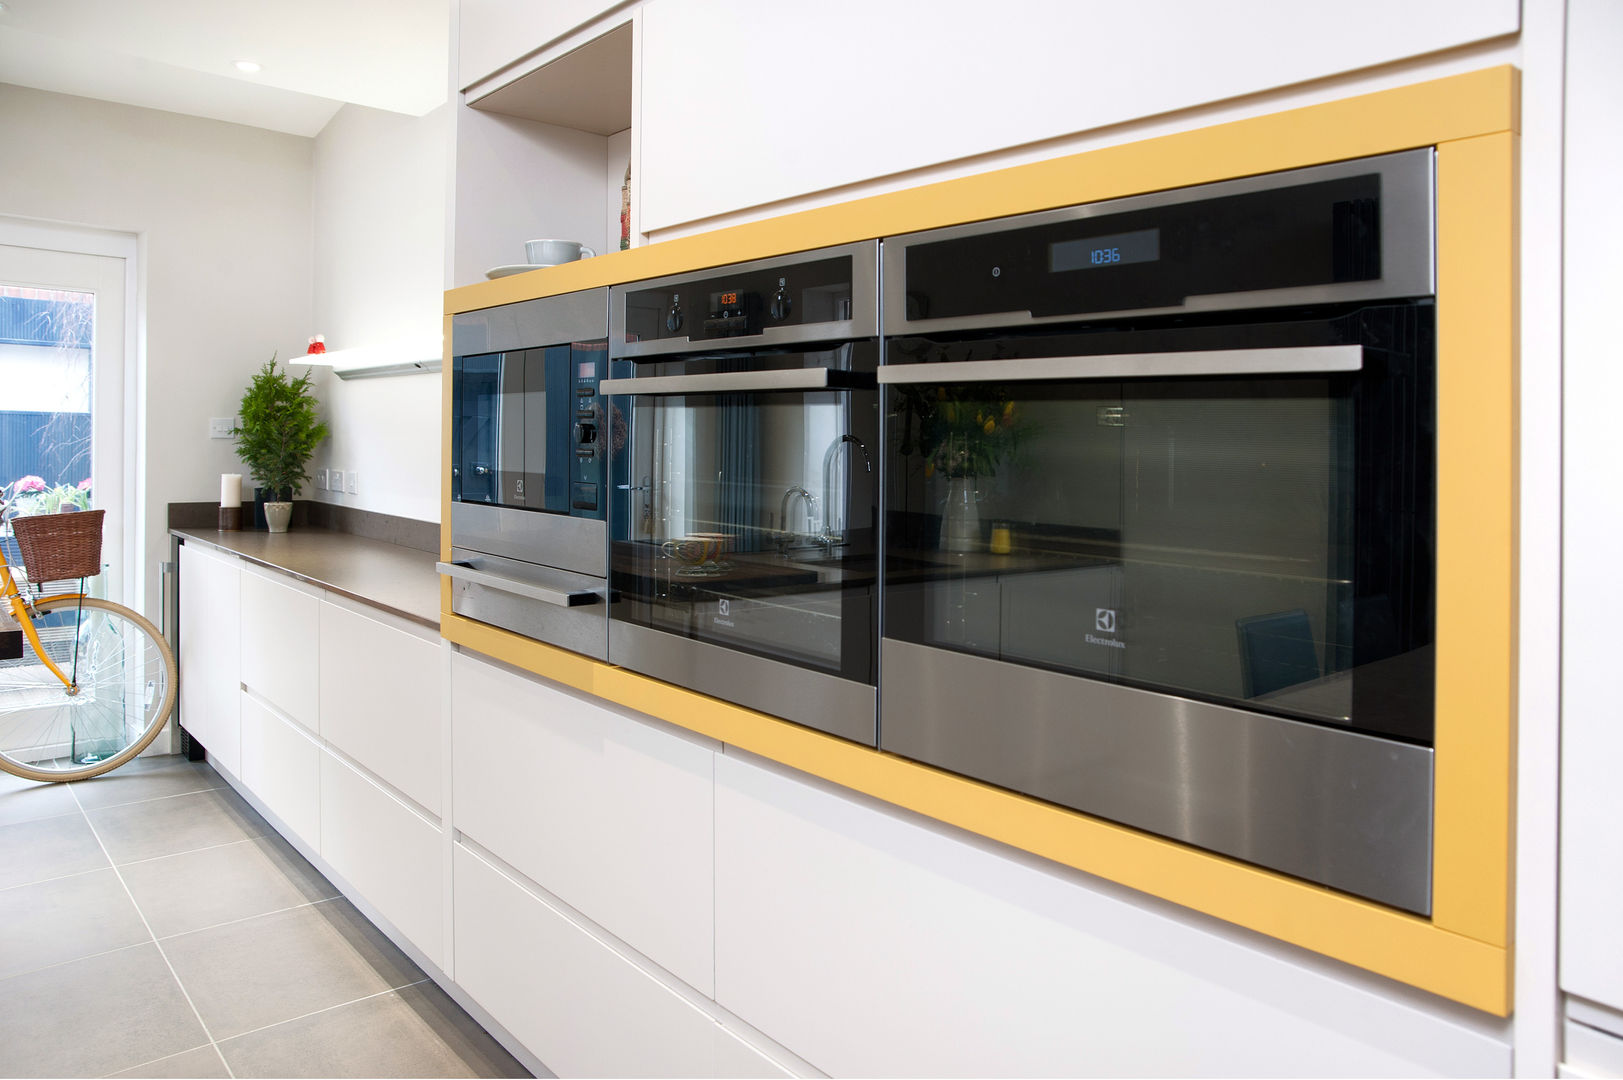 Electrolux appliances wrapped in Curry Yellow panelling Haus12 Interiors Modern Mutfak